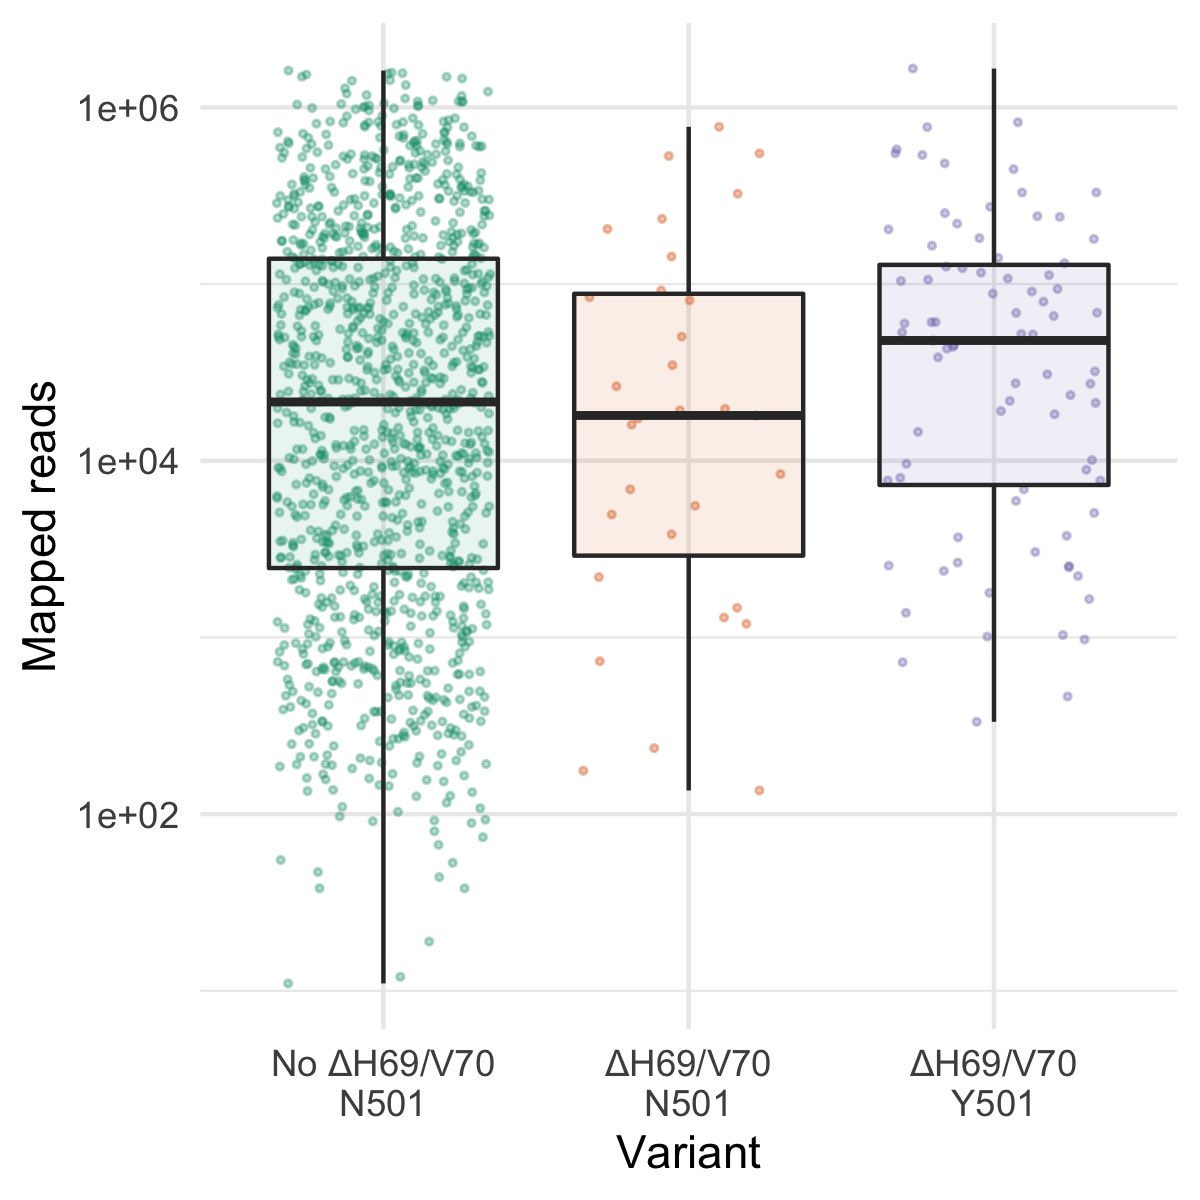 We found higher (sequence derived) viral loads in samples from individuals infected with the new variant. Median inferred viral loads were three-fold higher in individuals with the new variant